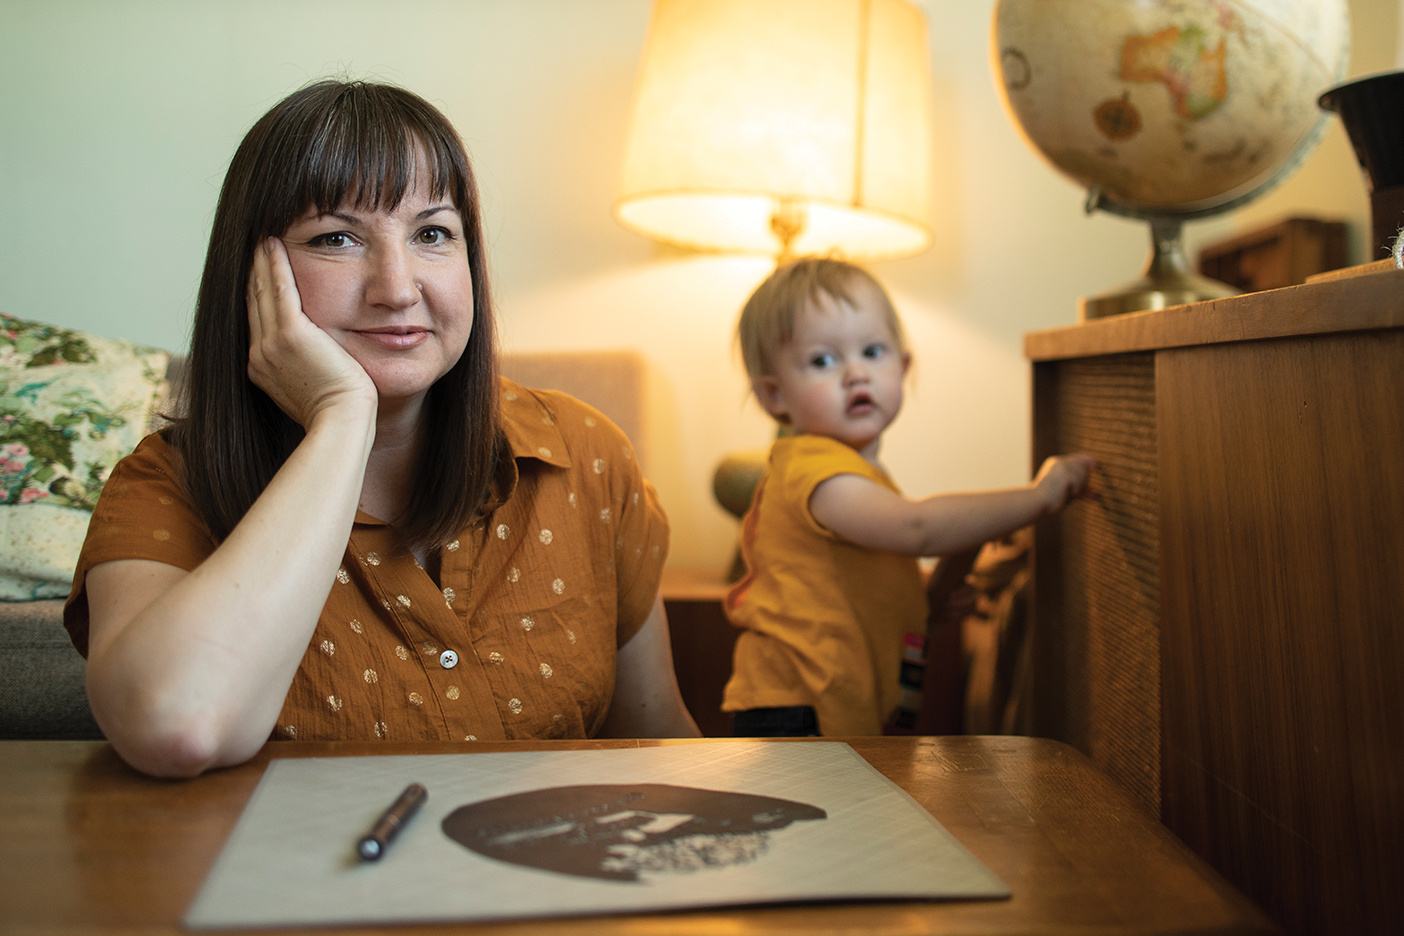 Her daughter playing in the background, Cindy Bean sits at a desk with one of her paper-cut creations.